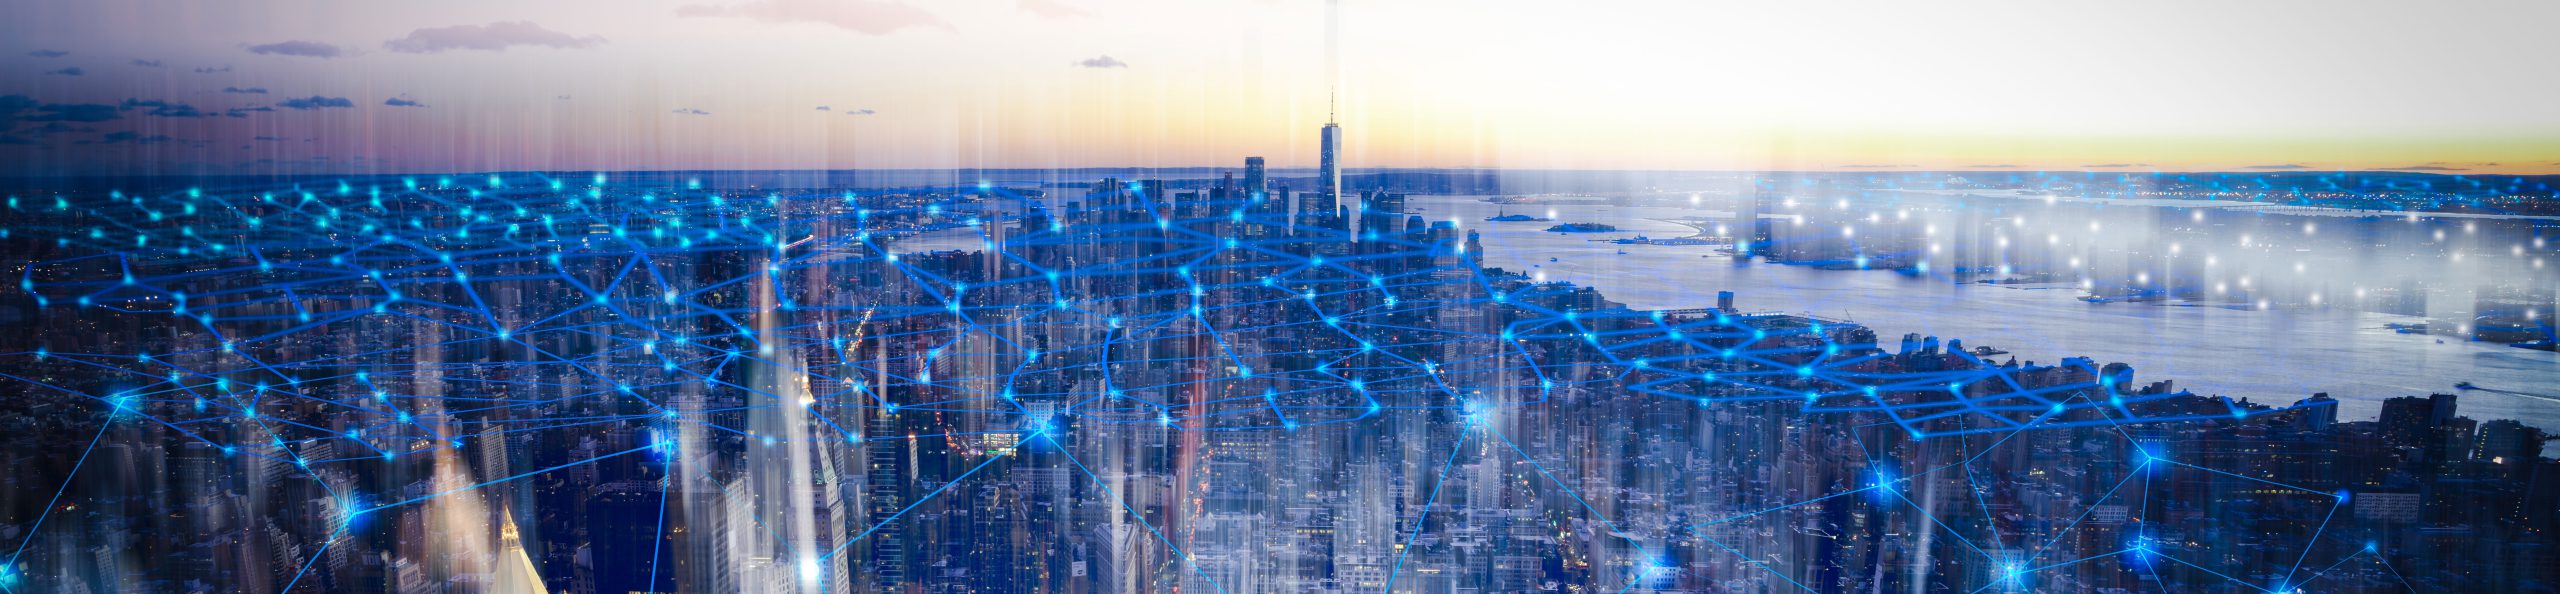 aerial view of a city and horizon at night with network connection lines overlaid